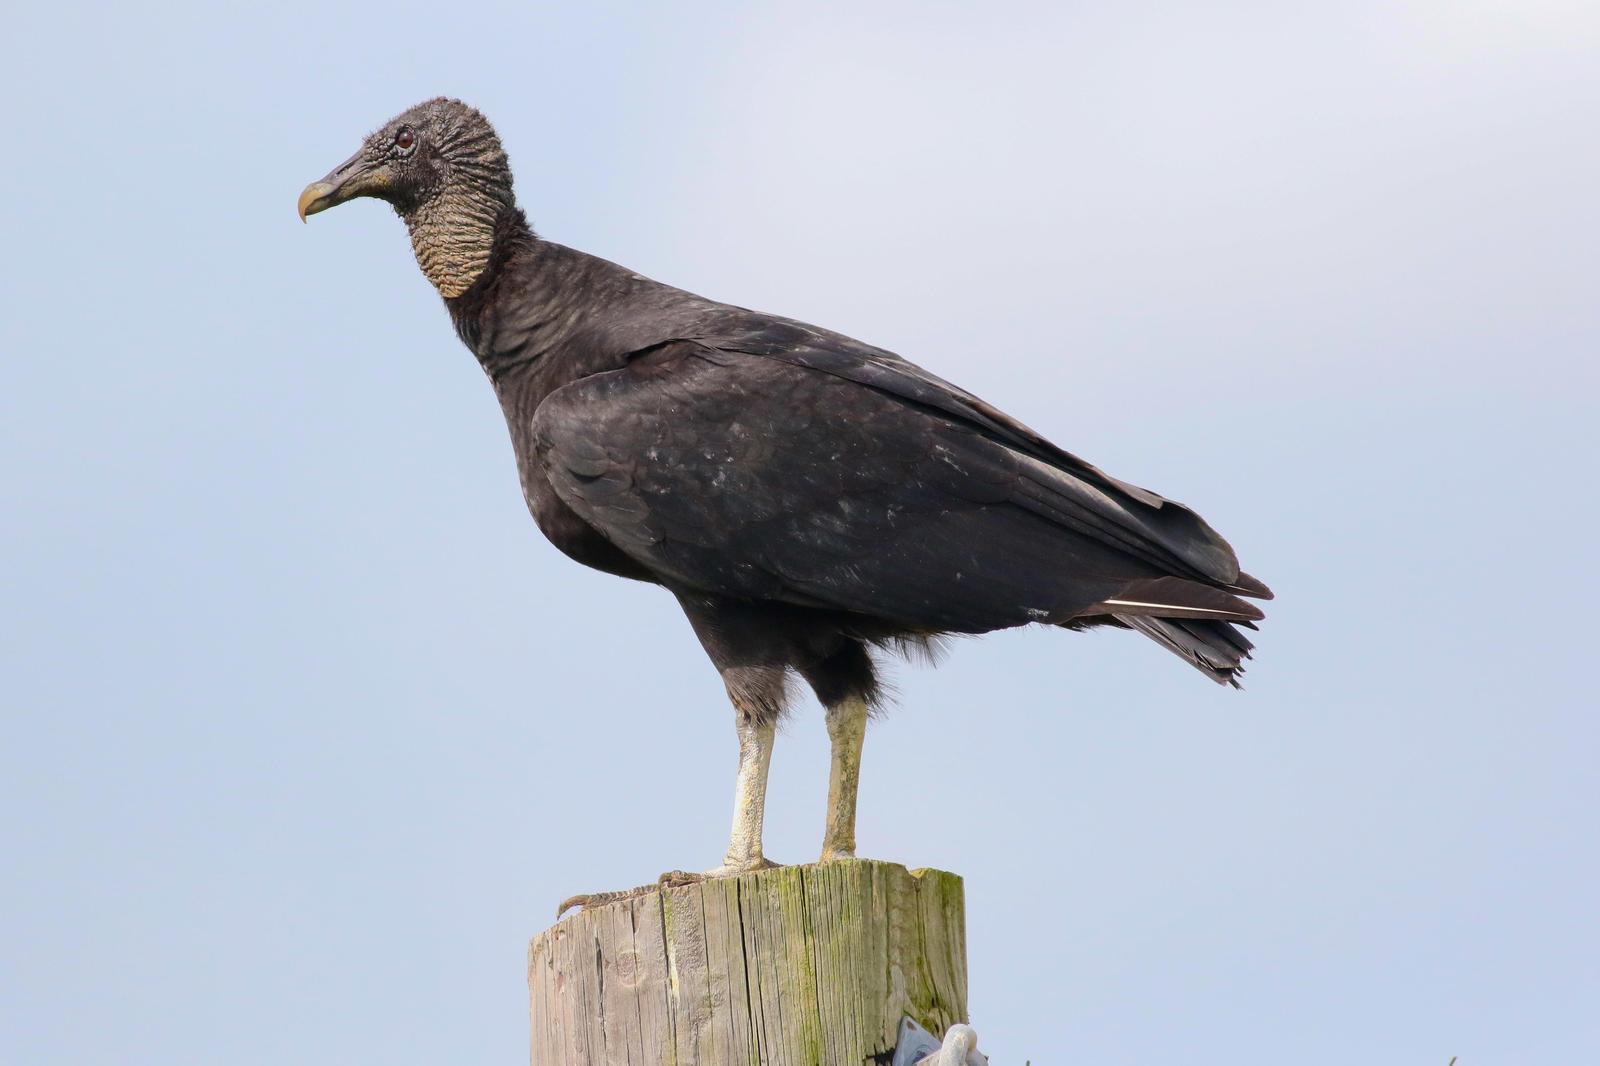 Black Vulture Photo by Tom Ford-Hutchinson